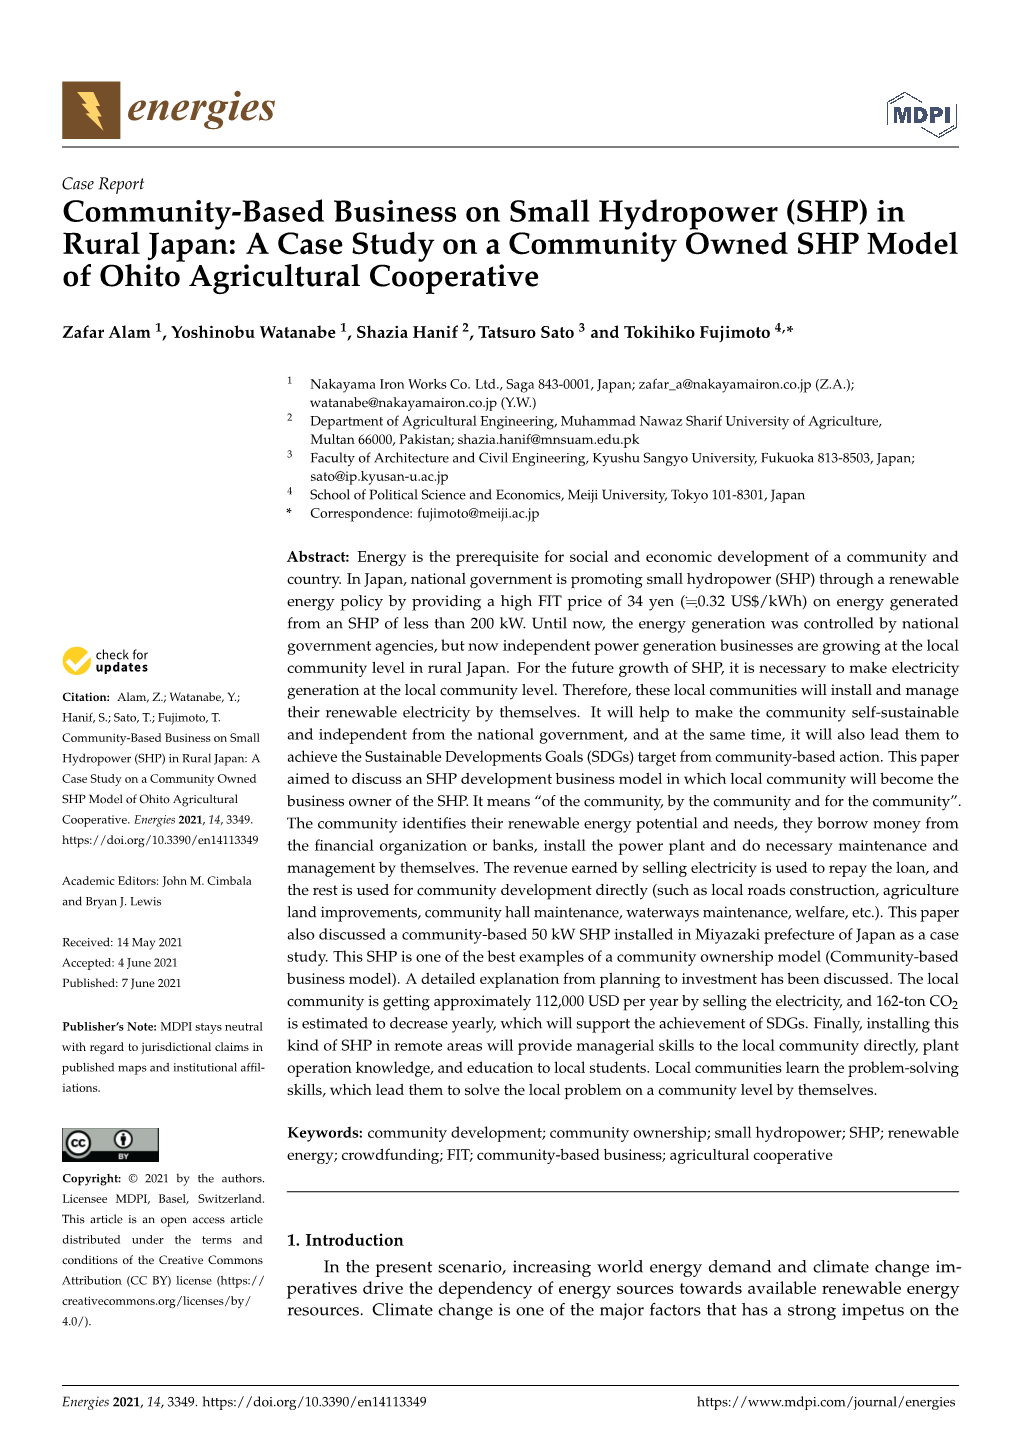 Community-Based Business on Small Hydropower (SHP) in Rural Japan: a Case Study on a Community Owned SHP Model of Ohito Agricultural Cooperative